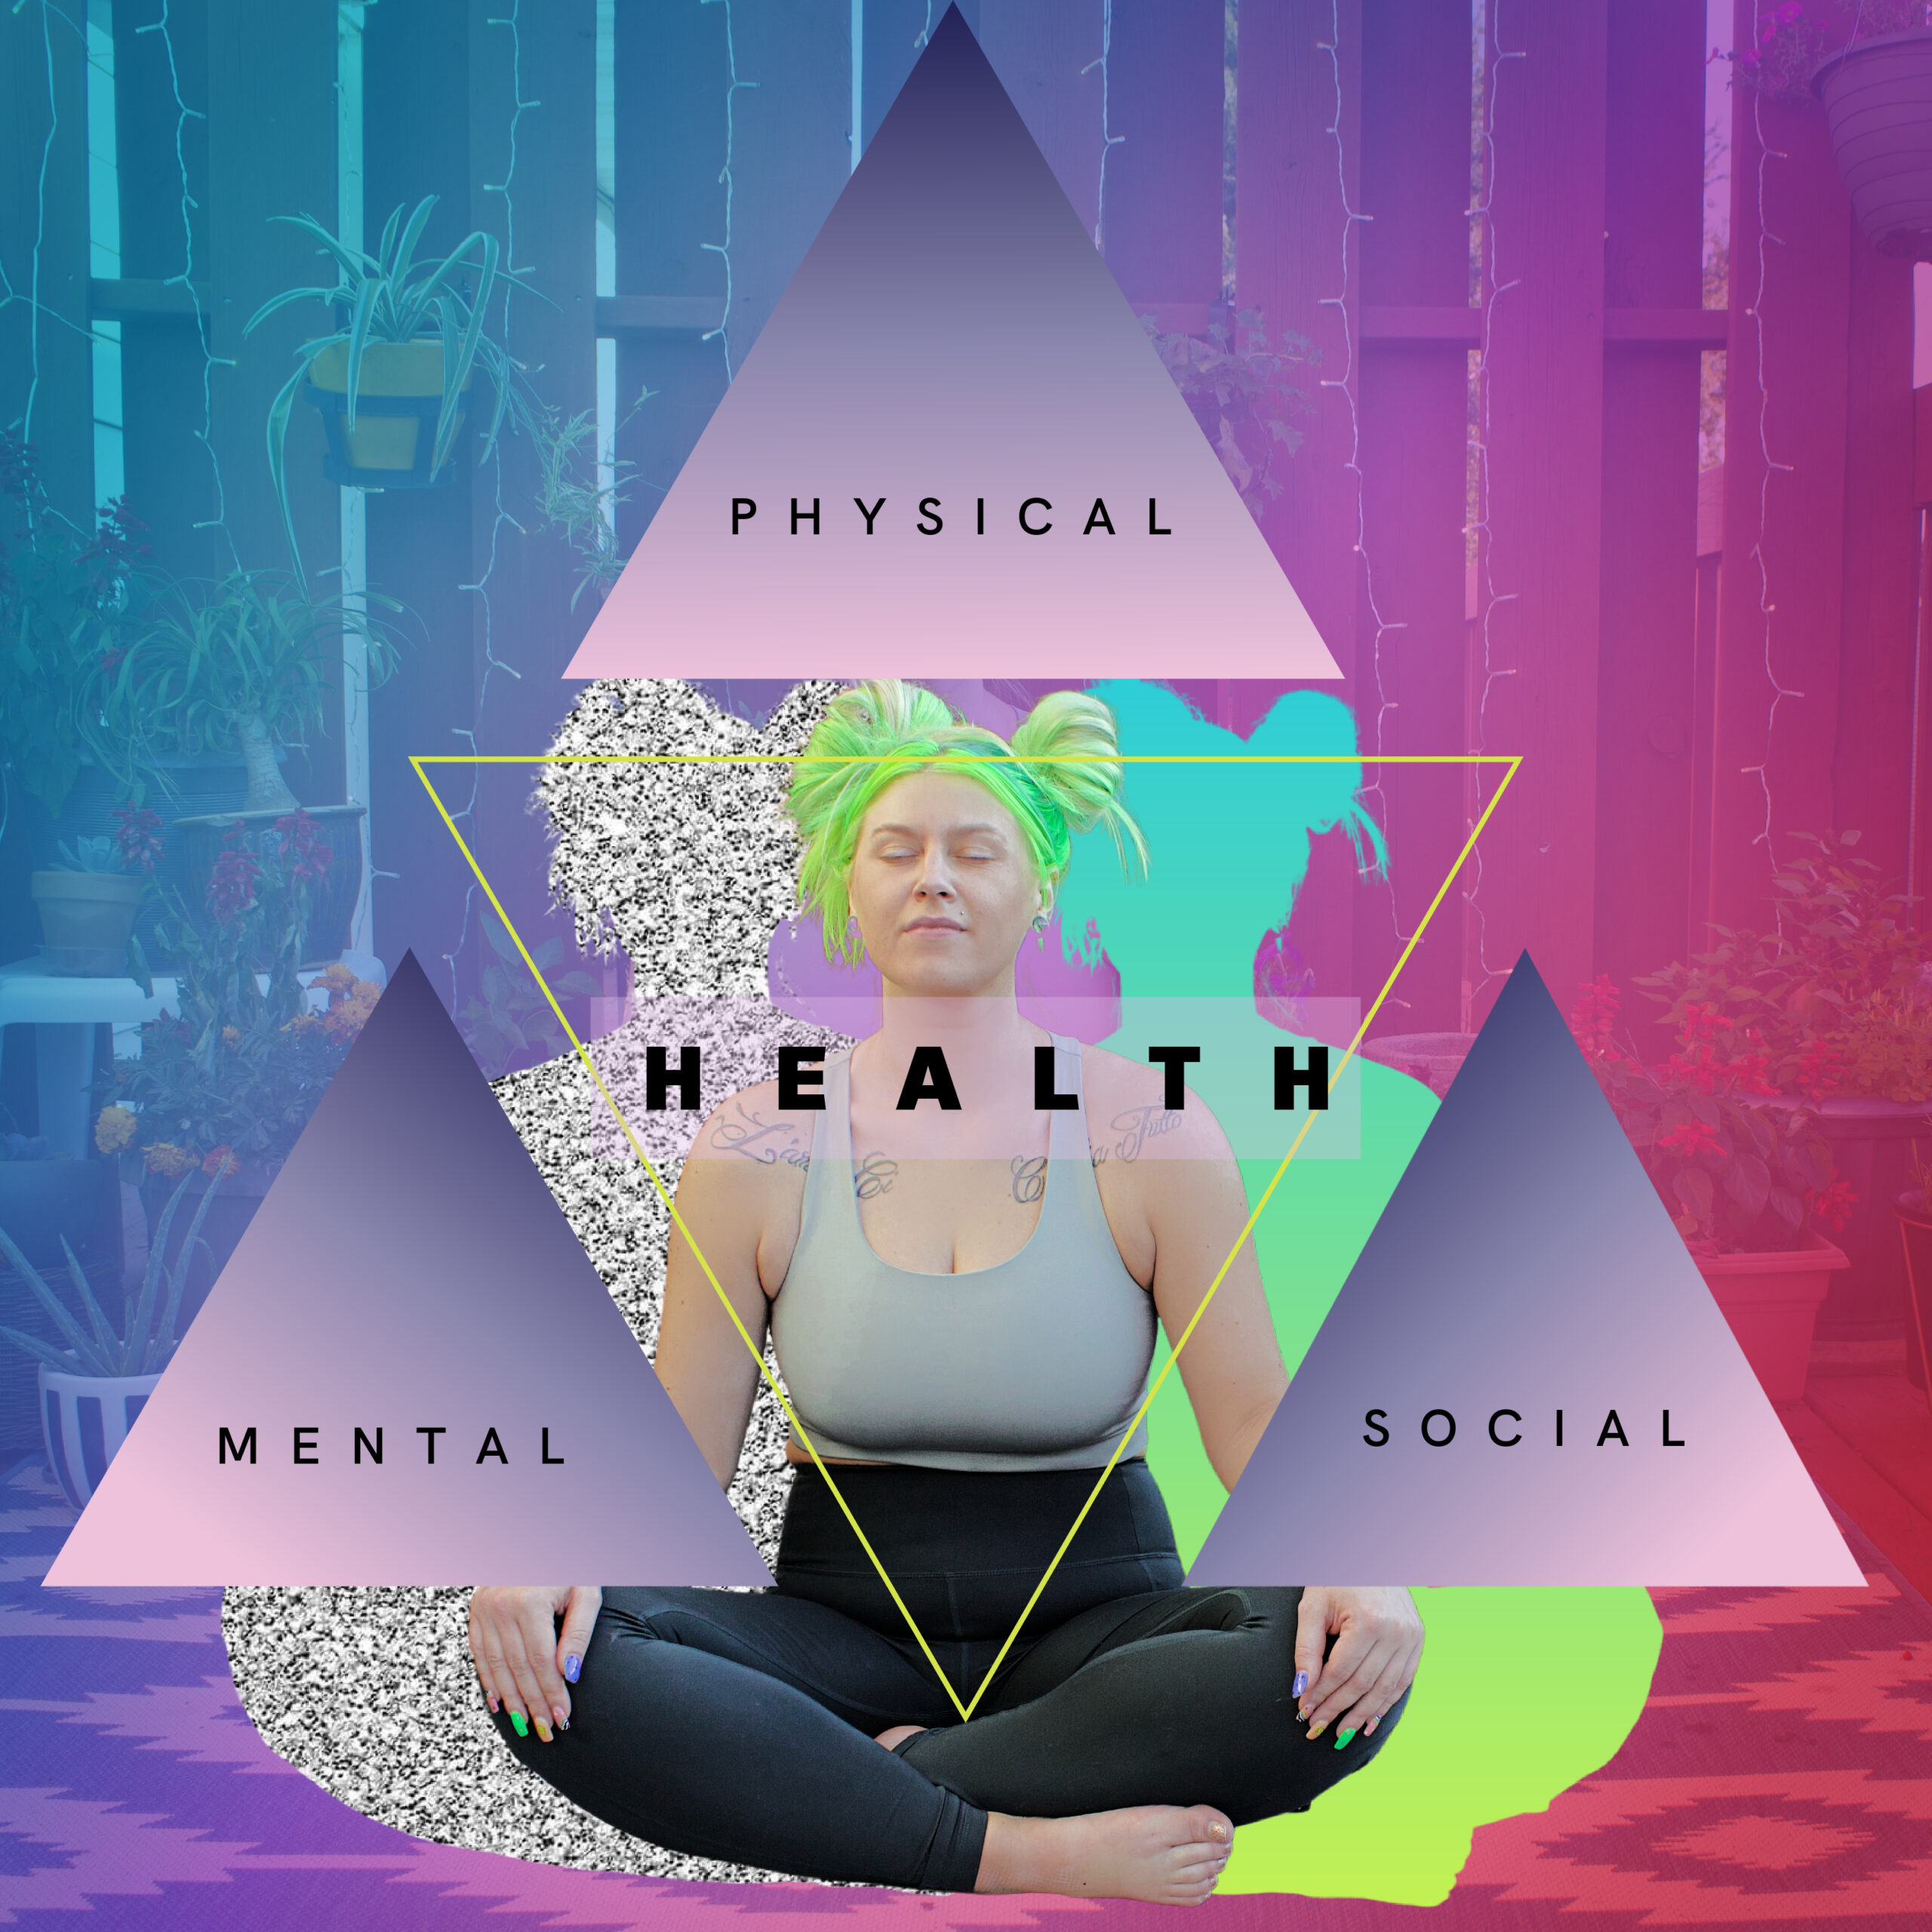 three categories of self care and health